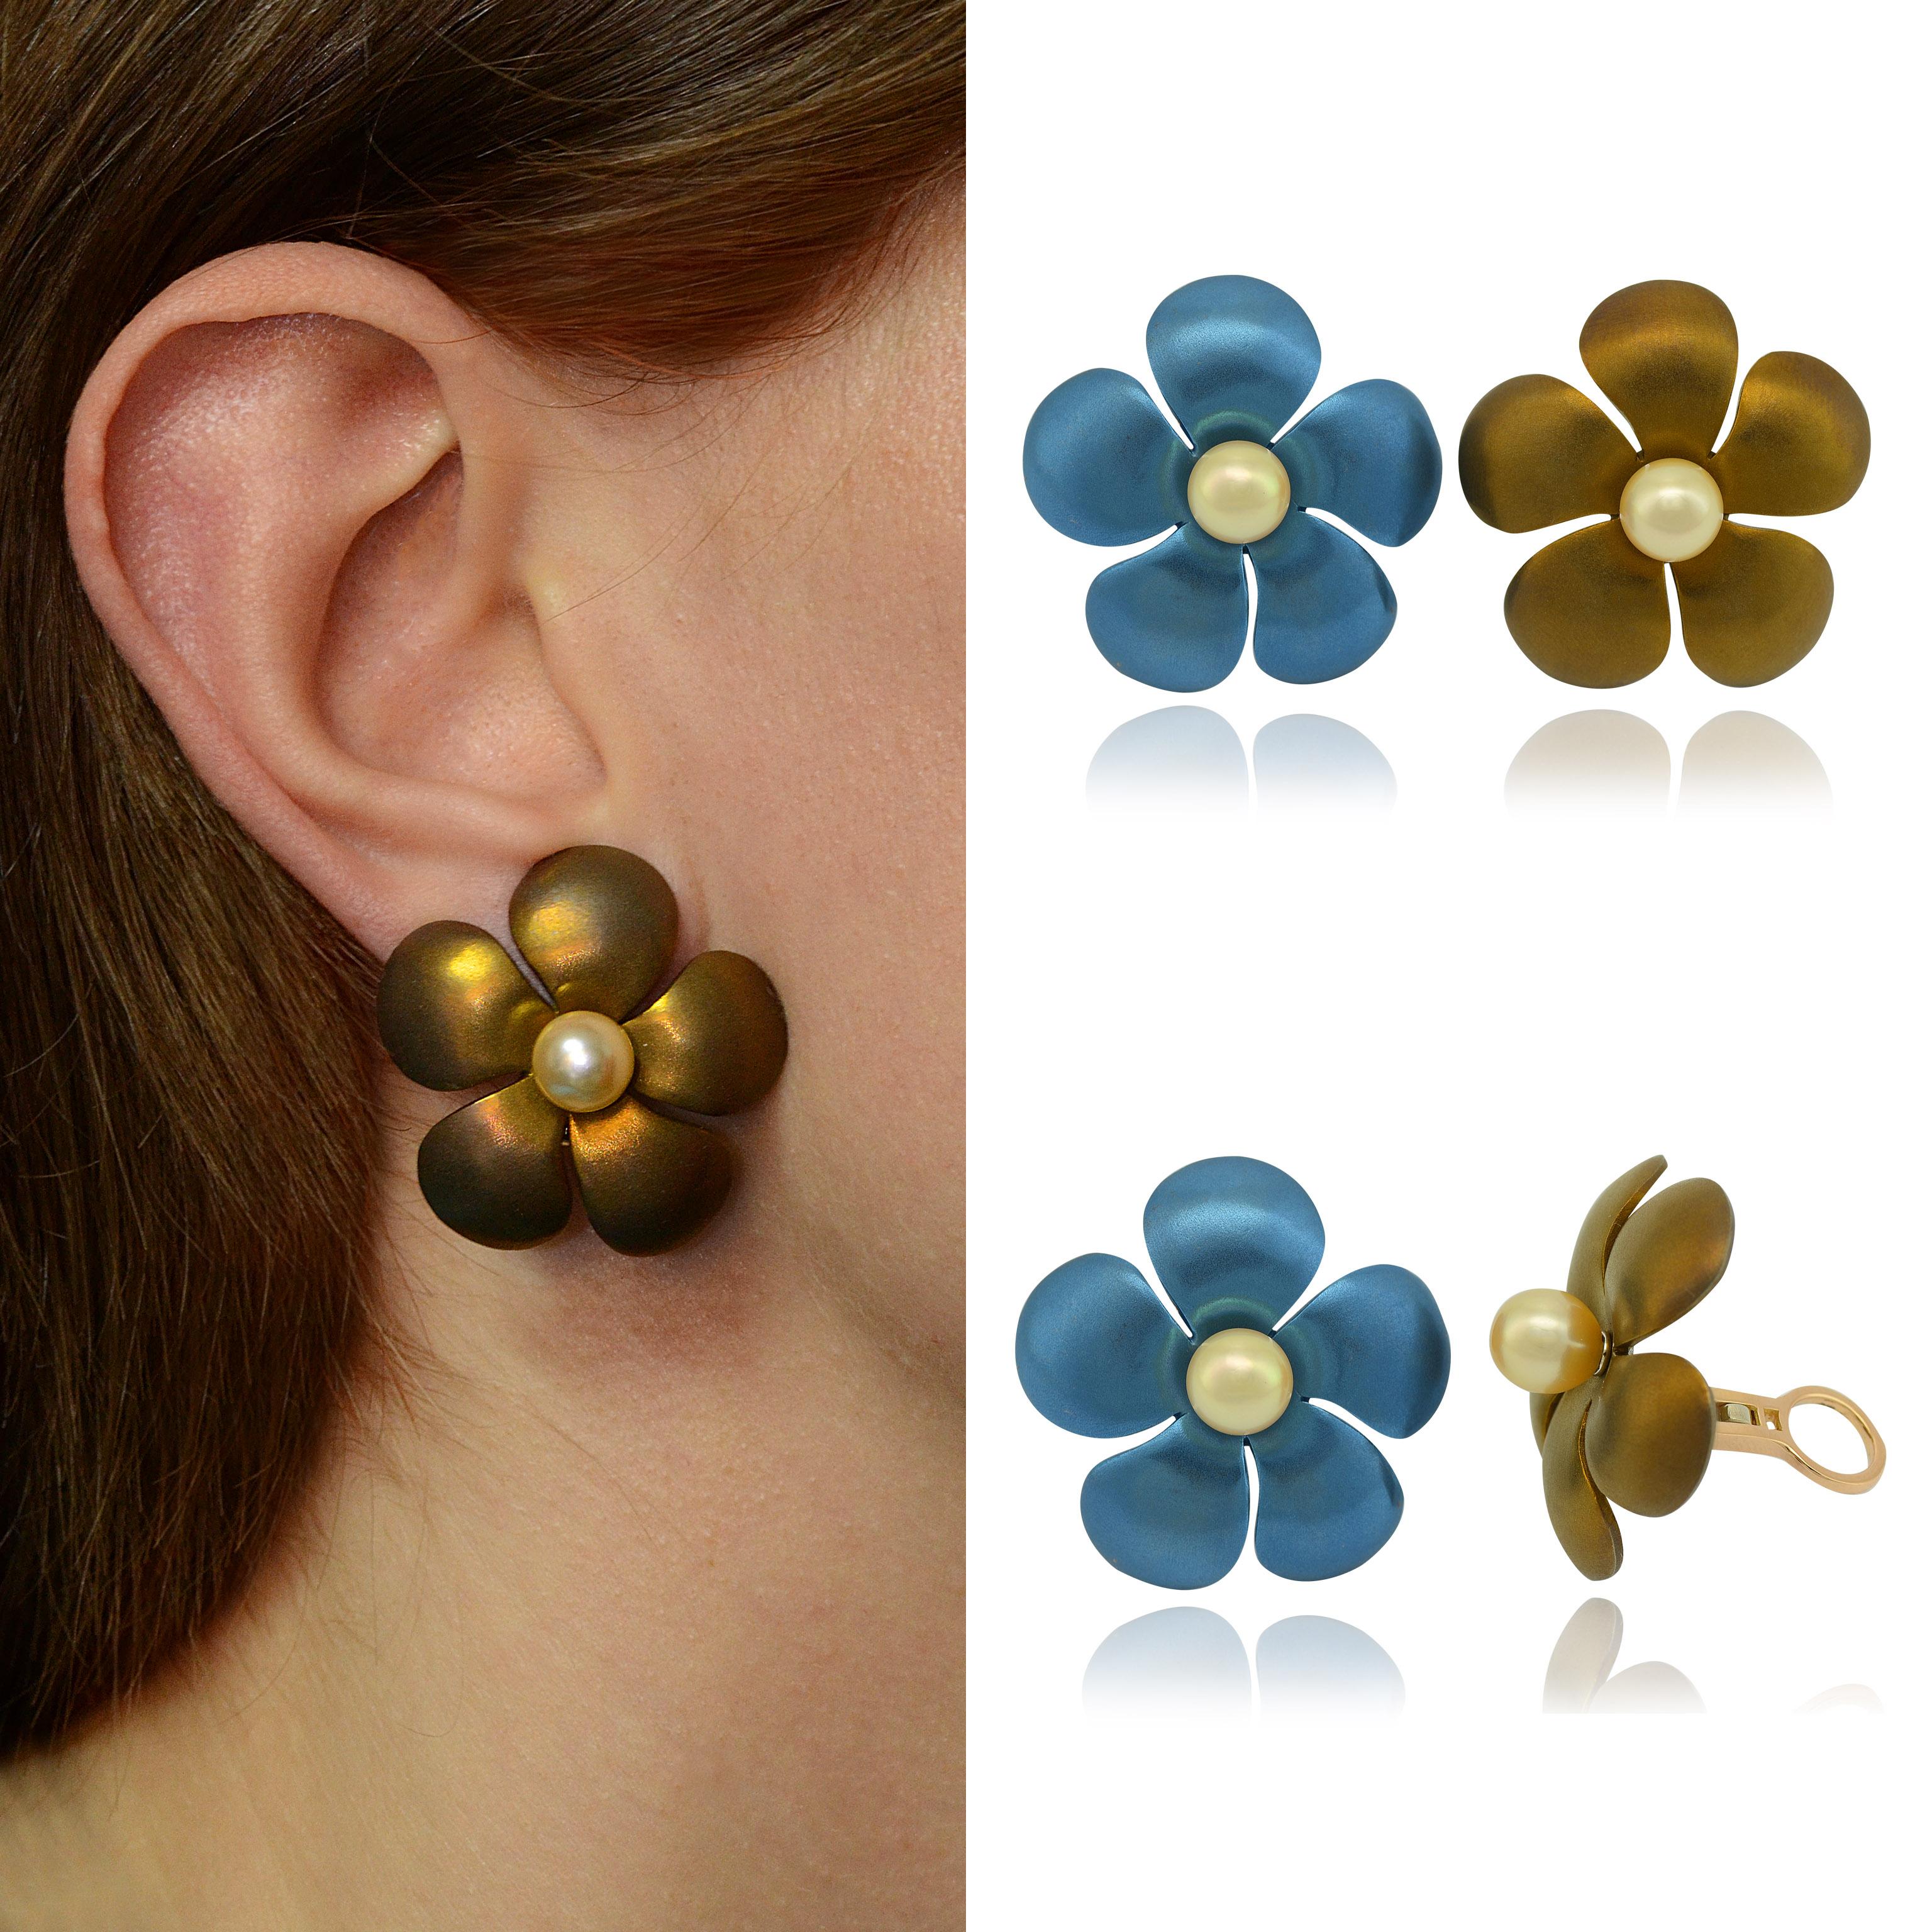 Very light titanium handmade mismatching earclips. 
They have a consistent clip in gold and fit for no pierced ears.
It is possible to add the fitting post for pierced ears. 
One earclips is sanitated blue and the other one is sanitated light brown,